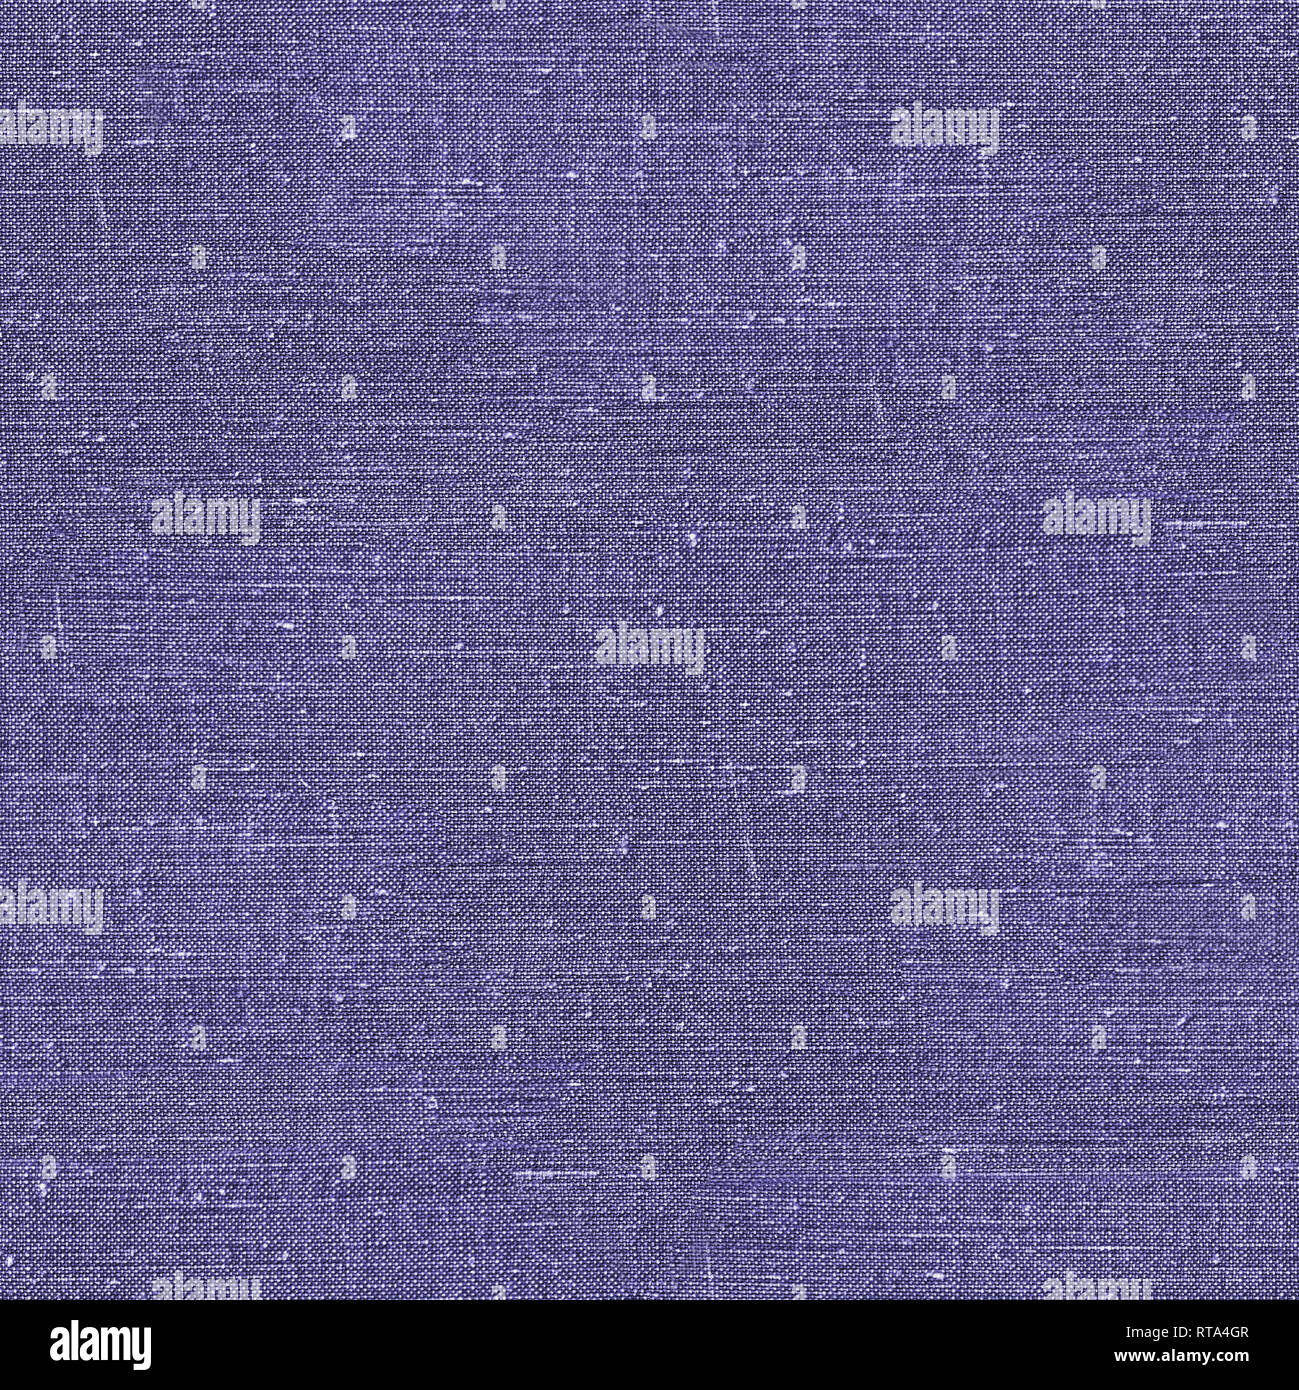 Seamless texture of blank piece of coarse cloth, natural rustic textile. Canvas, cotton, flex, burlap for your design. Trendy ultra violet color. Stock Photo